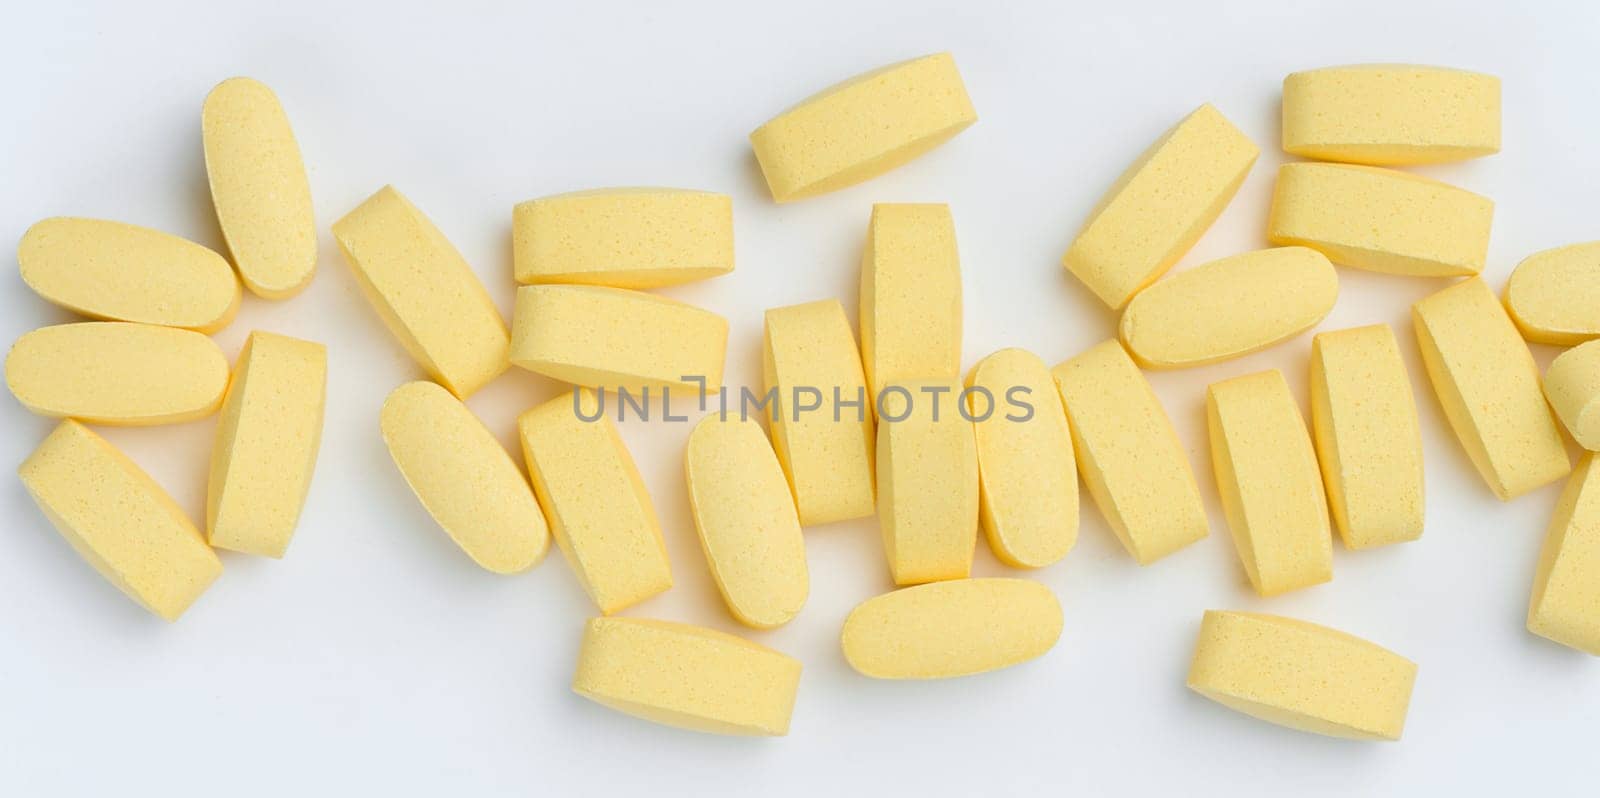 Yellow oval tablets on a white background, top view by ndanko